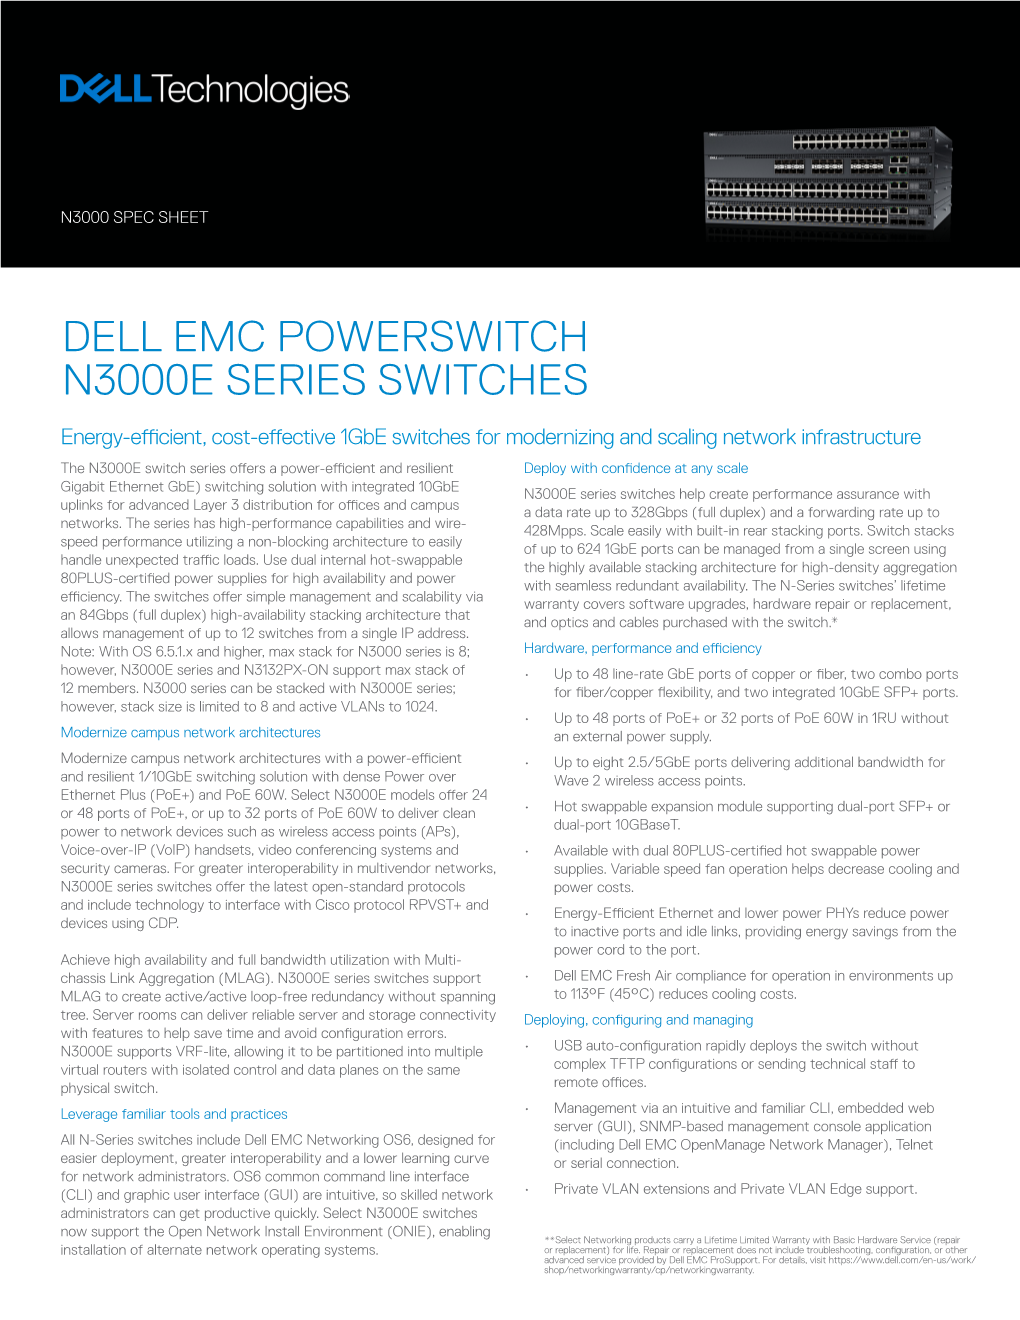 Dell Emc Powerswitch N3000e Series Switches